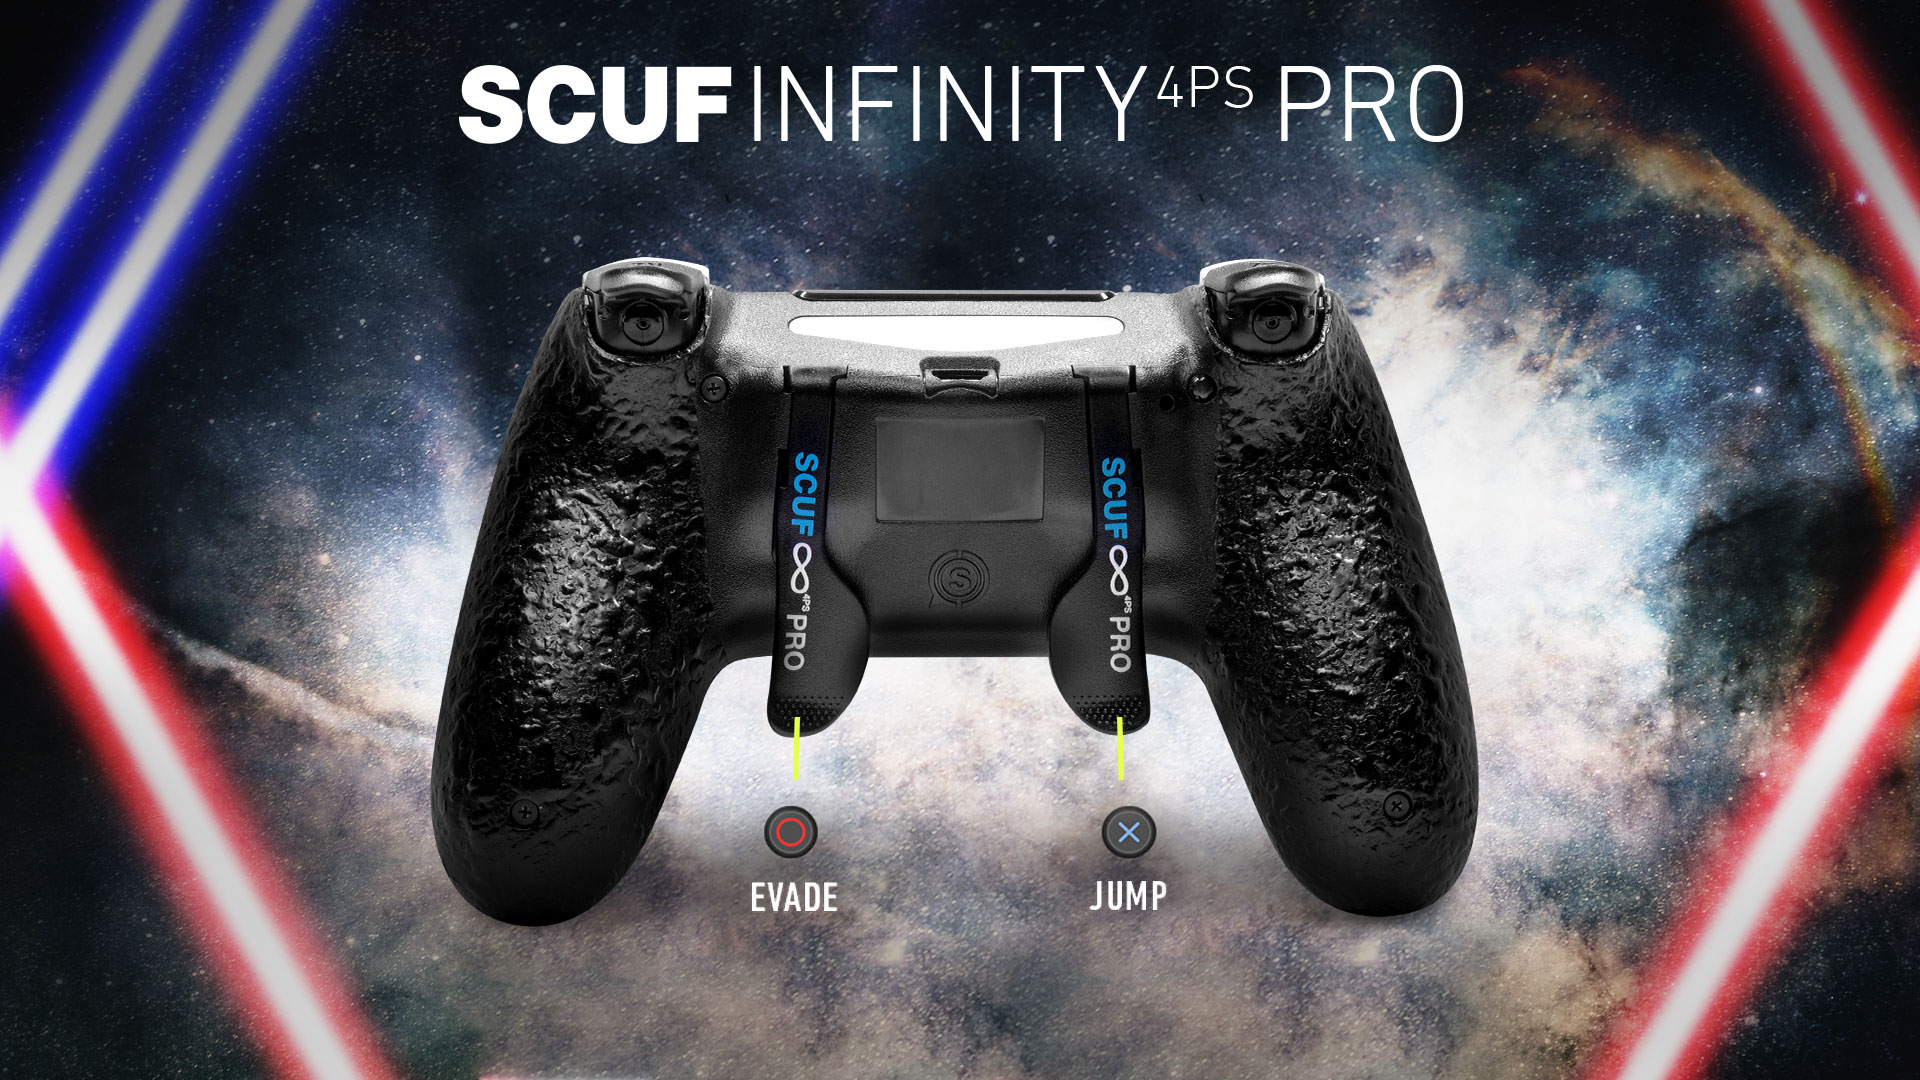 SCUF Infinty4PSPRO Star Wars Jedi Controller Configuration